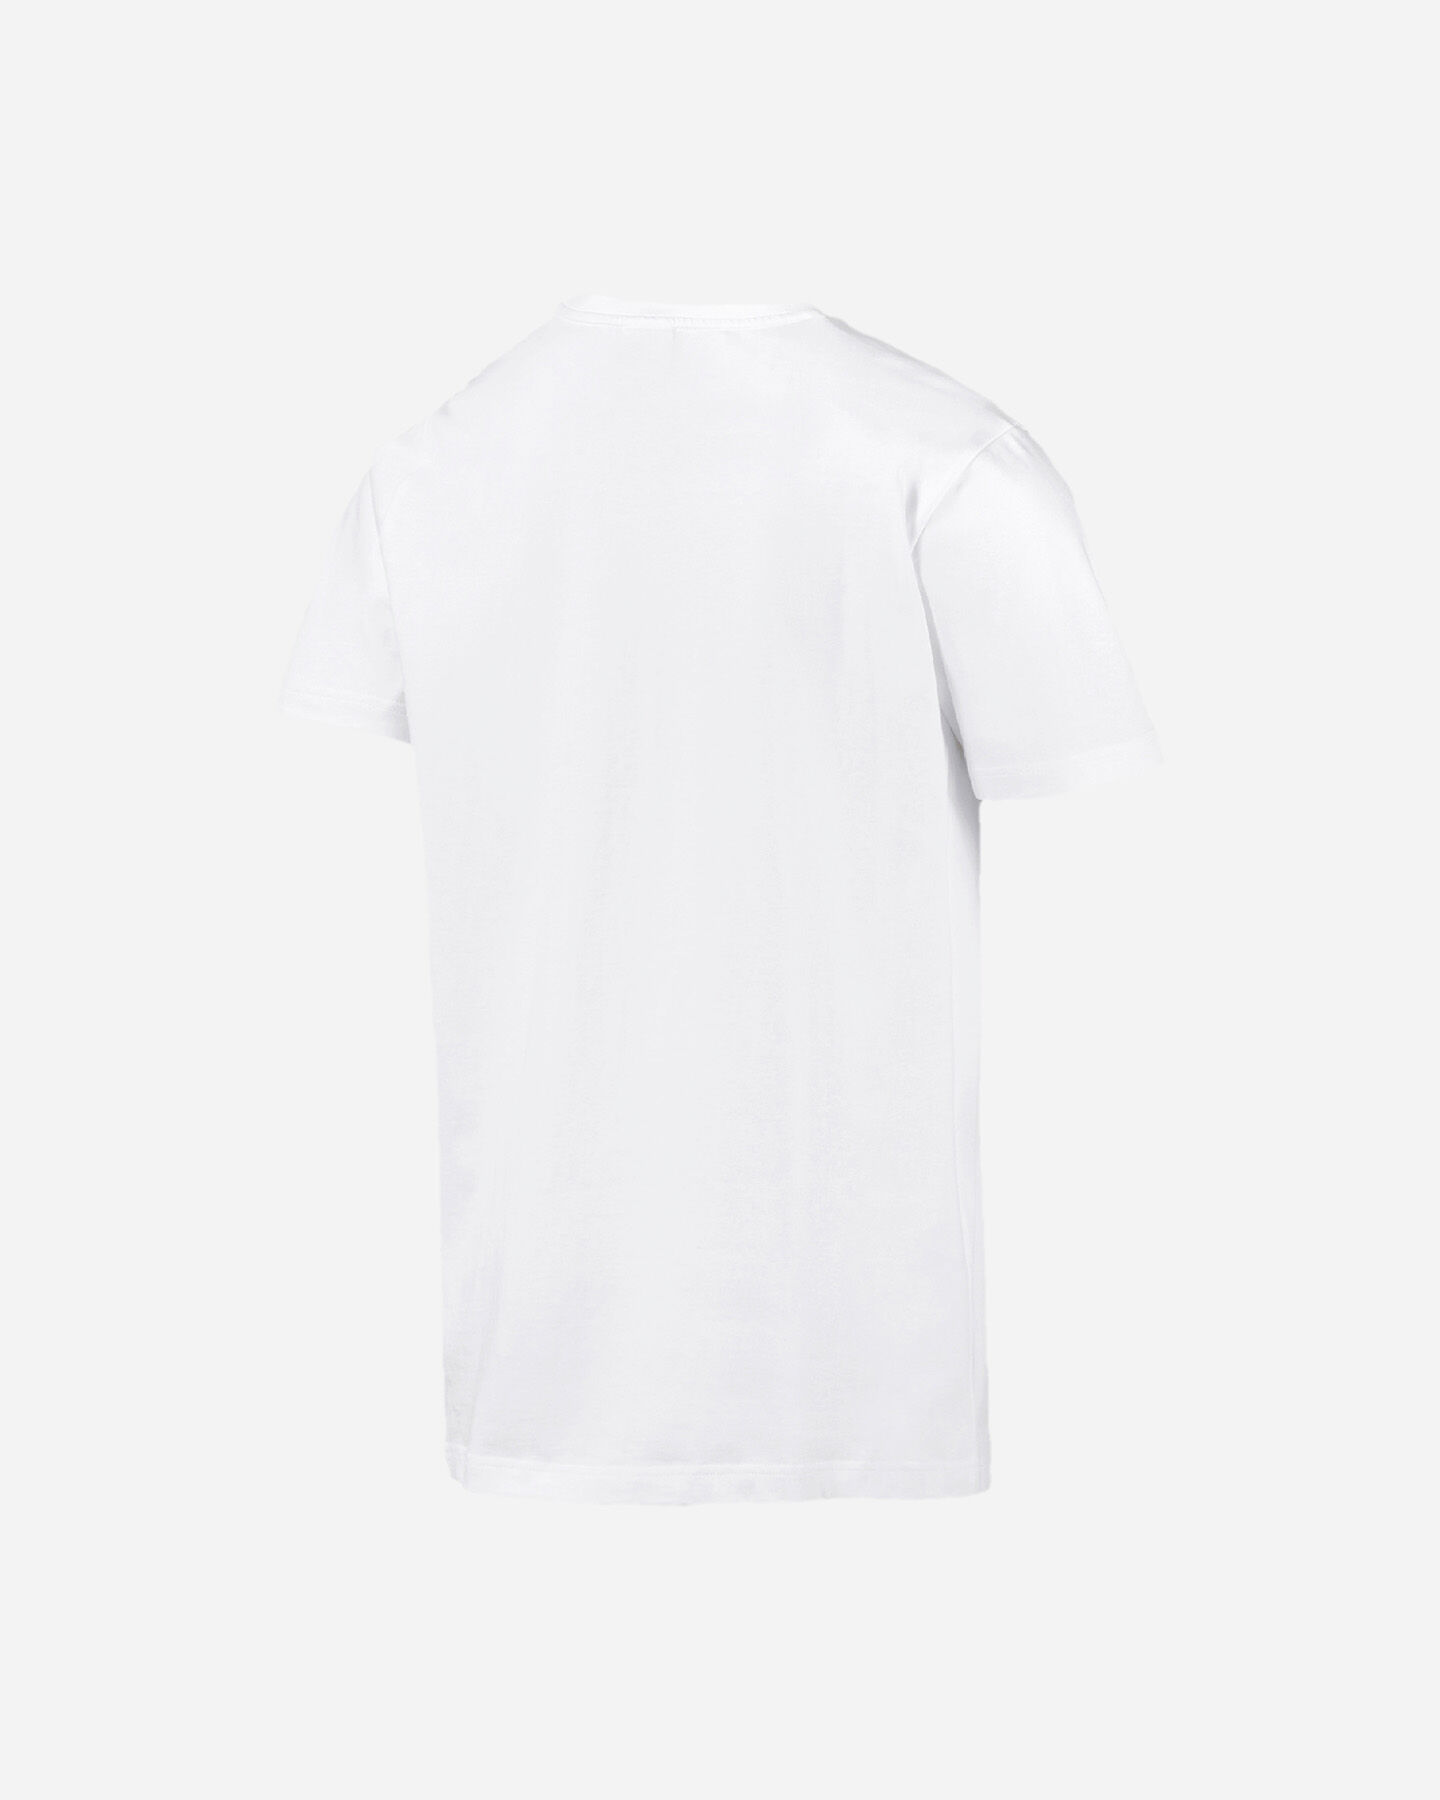  T-Shirt PUMA RS 9.8 SPACE CLASSIC M S5093147|02|S scatto 1